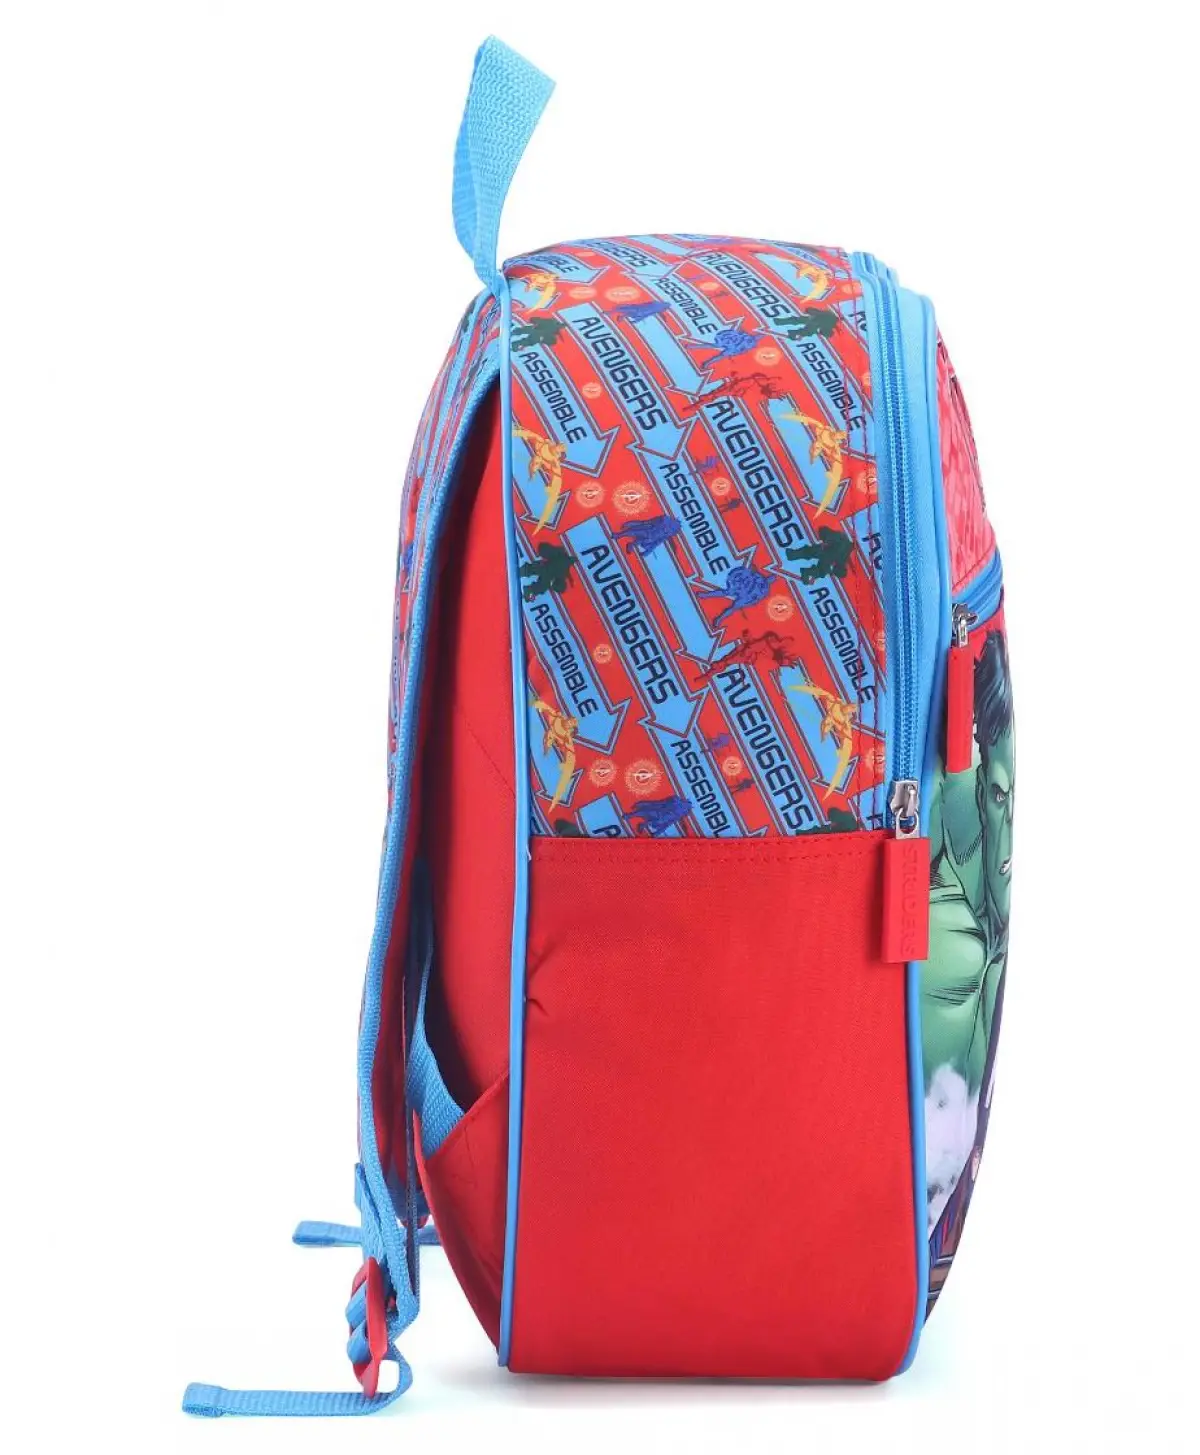 Striders 13 inches Avengers School Bag A Playful Companion for School Days Multicolor For Kids Ages 2Y+